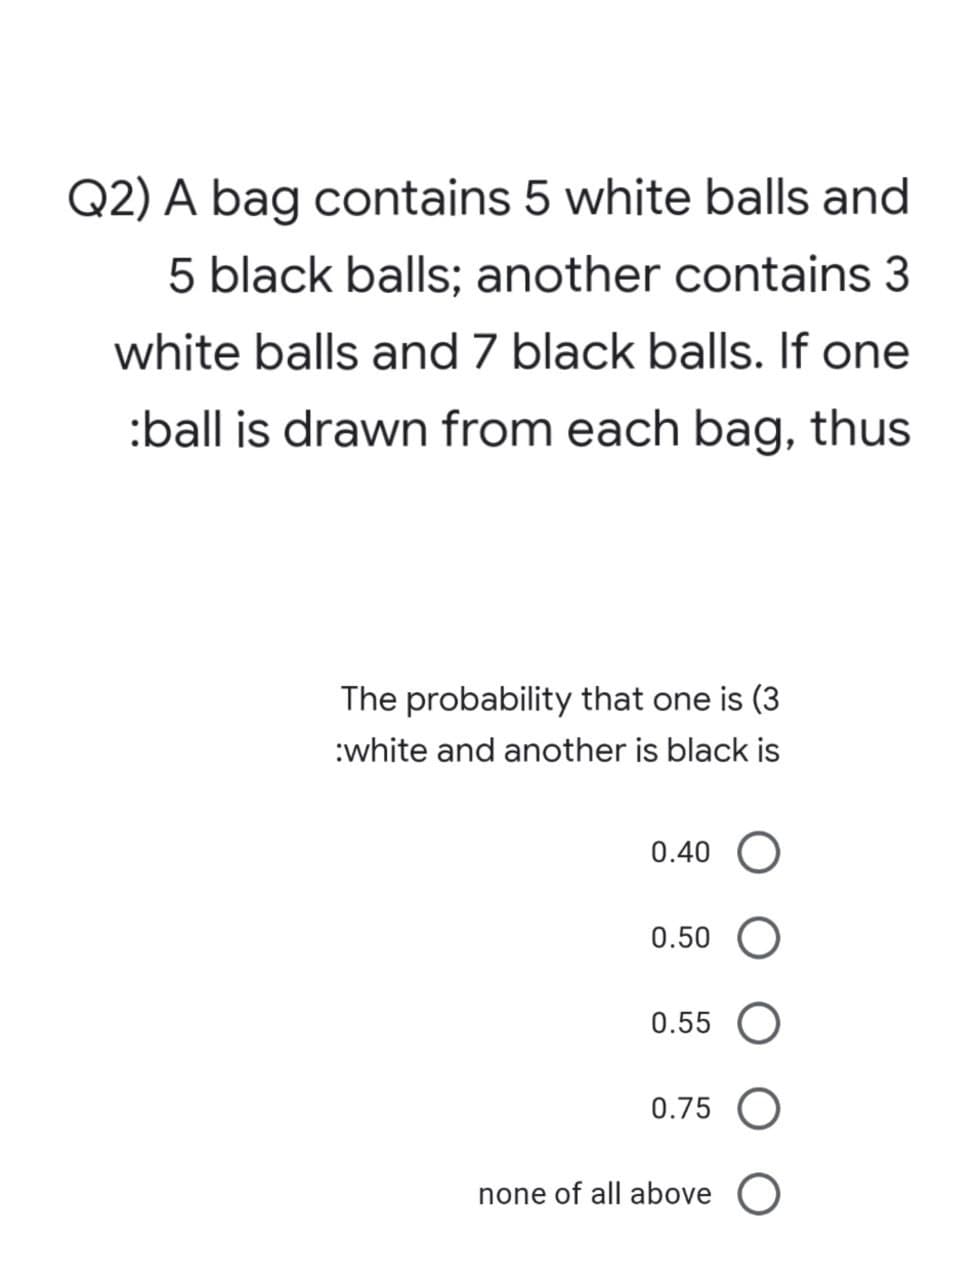 Q2) A bag contains 5 white balls and
5 black balls; another contains 3
white balls and 7 black balls. If one
:ball is drawn from each bag, thus
The probability that one is (3
:white and another is black is
0.40 O
0.50
0.55 O
0.75 O
none of all above O
